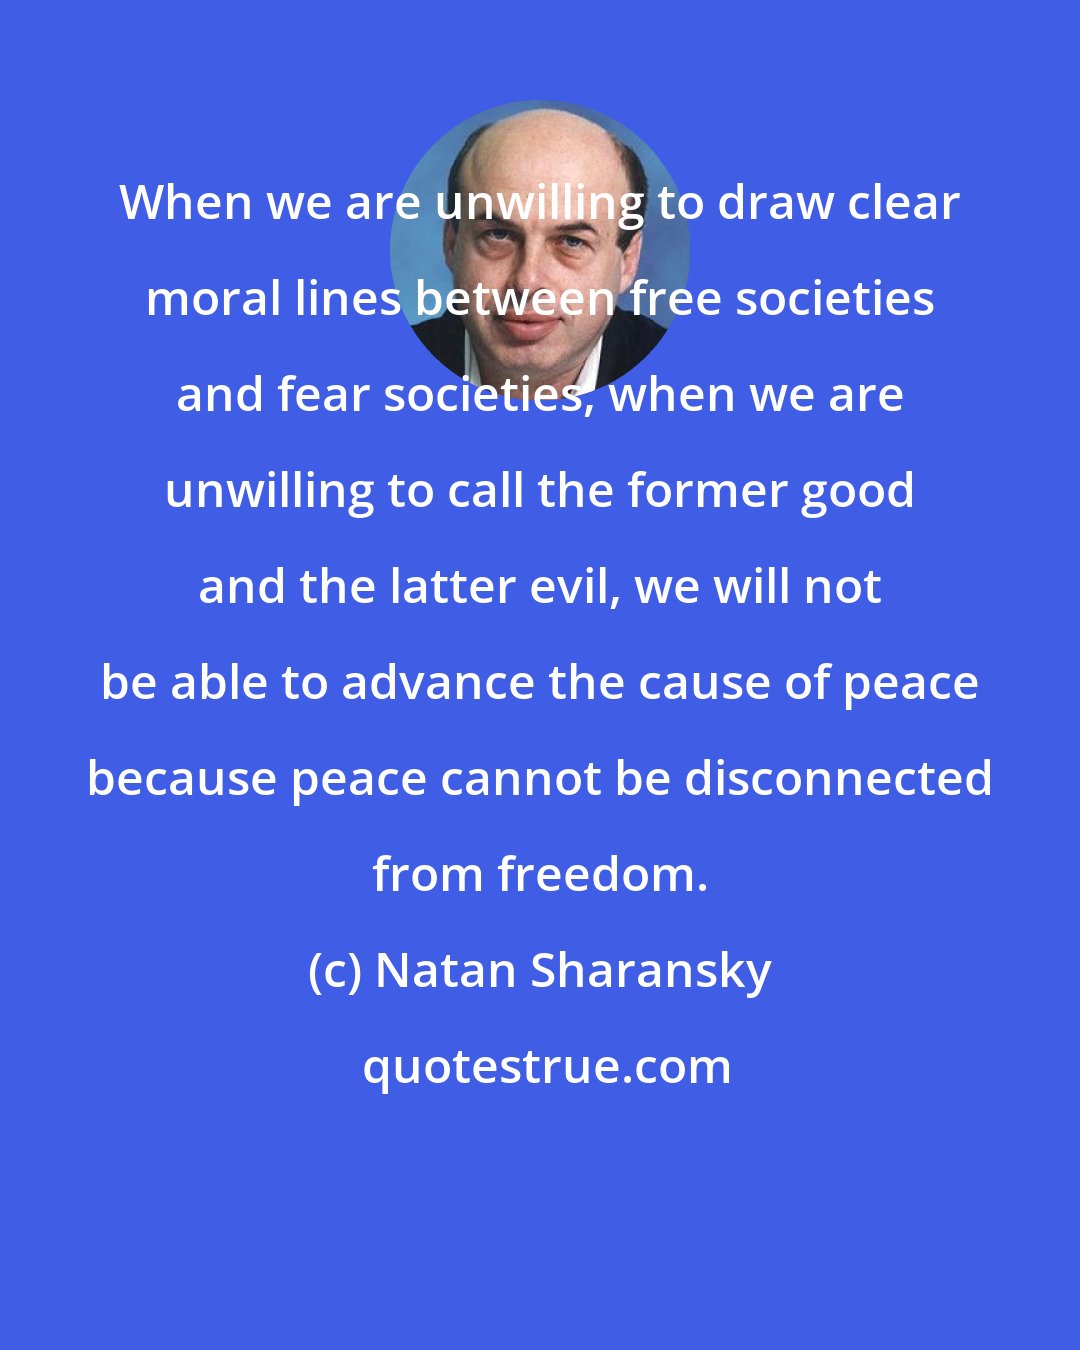 Natan Sharansky: When we are unwilling to draw clear moral lines between free societies and fear societies, when we are unwilling to call the former good and the latter evil, we will not be able to advance the cause of peace because peace cannot be disconnected from freedom.